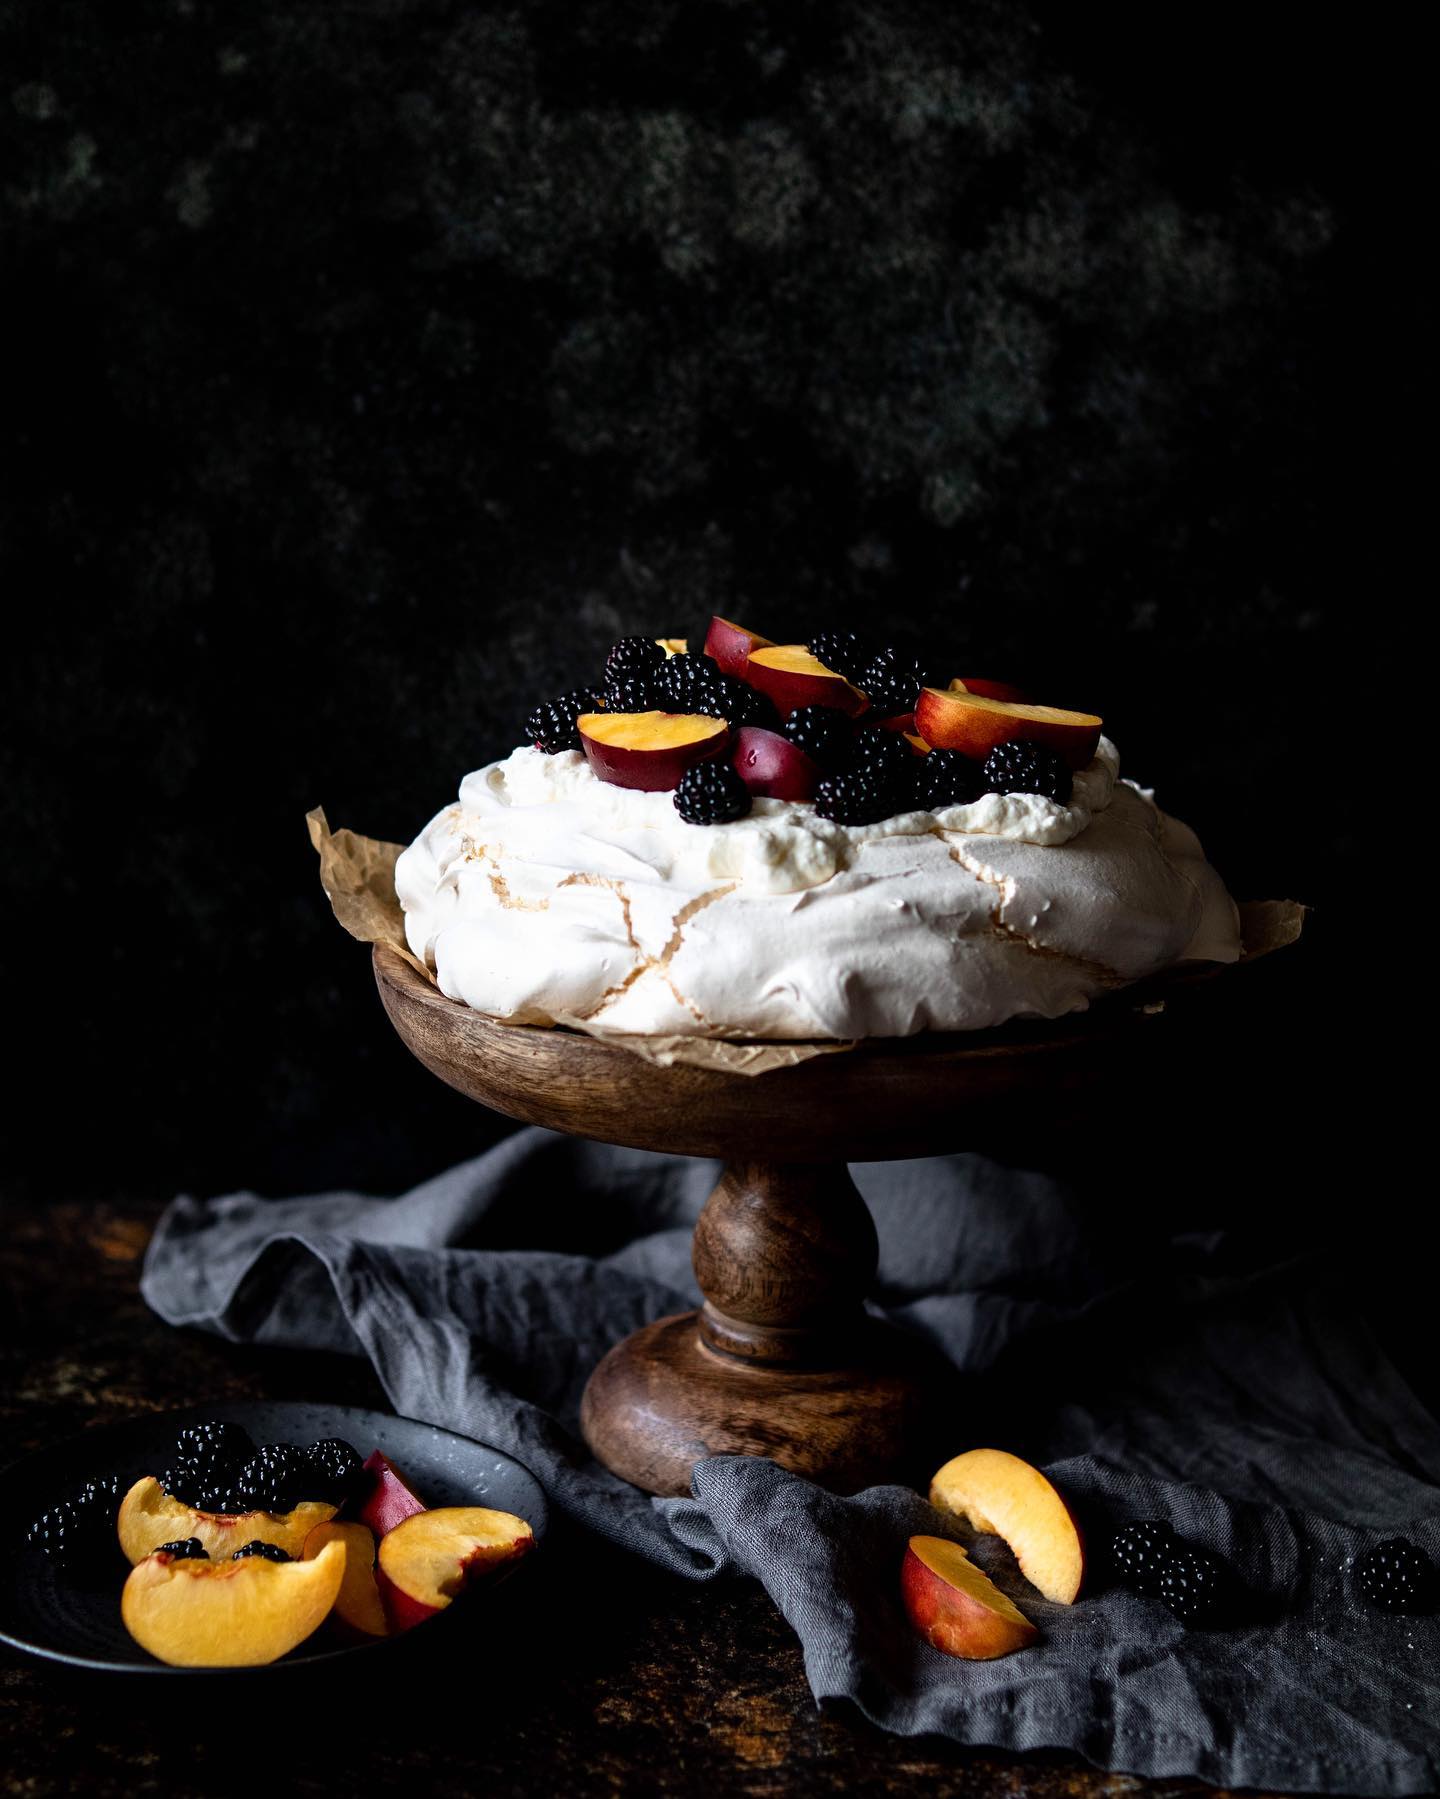 It’s Friday and I already had two aperol spritz and bought beautiful flowers, so it’s definitely a good day. It would be an even better day if I had a slice of this delicious pavlova with nectarines and blackberries, but you can’t have it all, am I right? 😅 anyway the recipe will come to the blog veeery soon so stay tuned 😊

I’ve created this for #thegreatinstabakecollab hosted by @breadbakingbabe - thank you Tiffany for making us try so many new things ❤️

Also submitting this to #useyourcreativenoodles September theme “negative space” by @useyournoodles judged by @asweetpointofview and sponsored by @fodory.com_ ✨

#backenmitliebe #backenmachtglücklich #backenmachtspass #backenmachtfreude #freshbaked #bakefromscratch #bakersofinstagram #foodphotography #foodstyling #foodblogger #foodblogger_de #foodphoto #foodshot #feedfeed #feedfeedbaking #thebakefeed #foodblogfeed #foodtographyschool #foodfluffer #tohfoodie #foodartblog #hezzahezfood #foodartblogs #foody365 #cuisine_creations #beautifulcuisines #foodblogliebe #storyofmytable